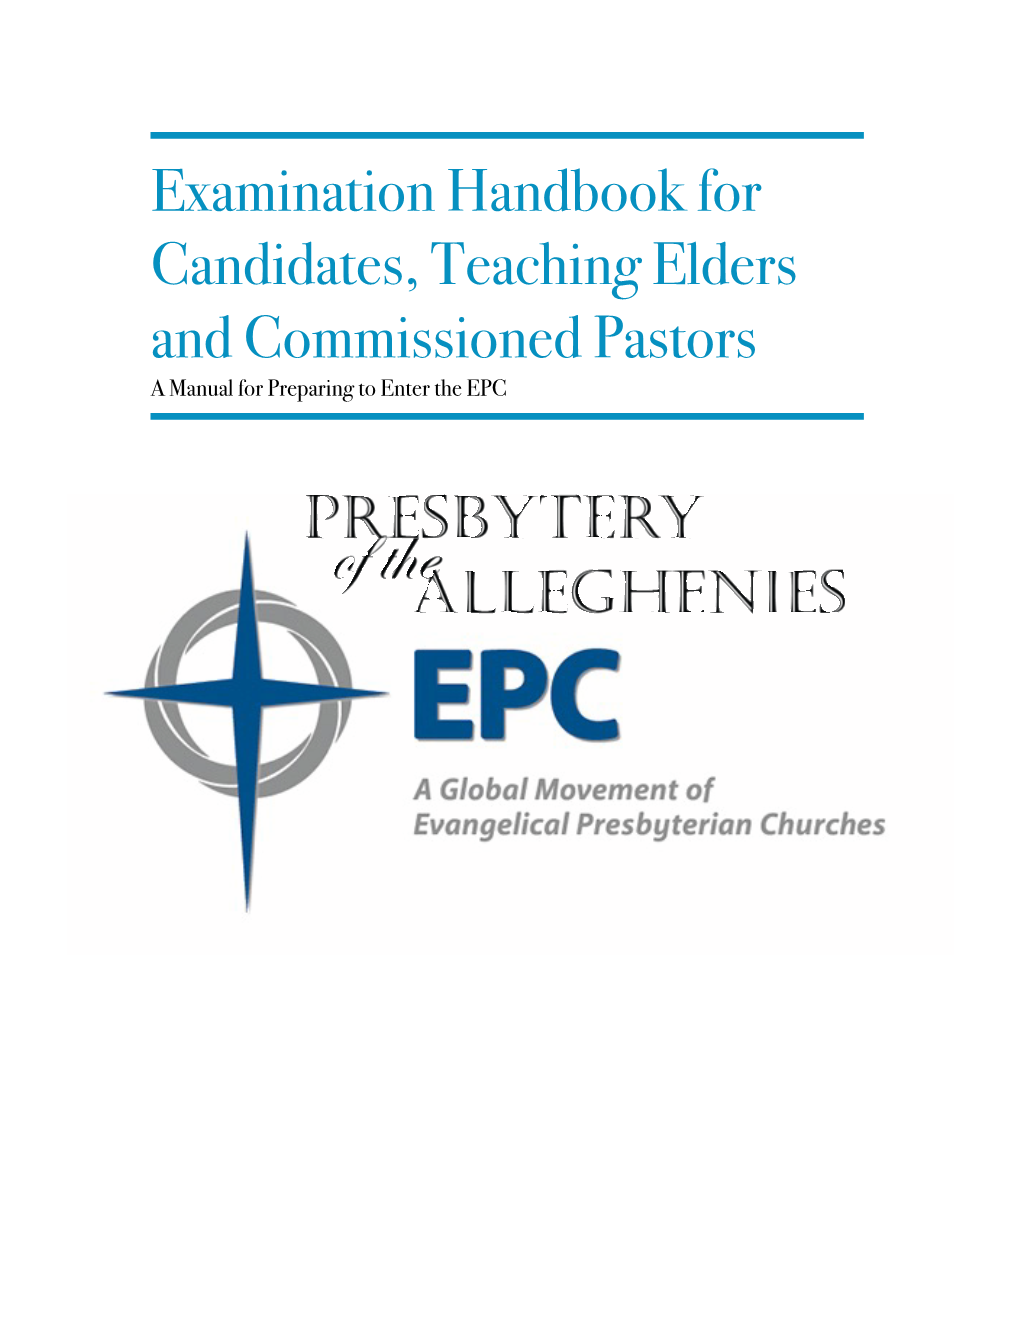 Examination Handbook for Candidates, Teaching Elders and Commissioned Pastors a Manual for Preparing to Enter the EPC